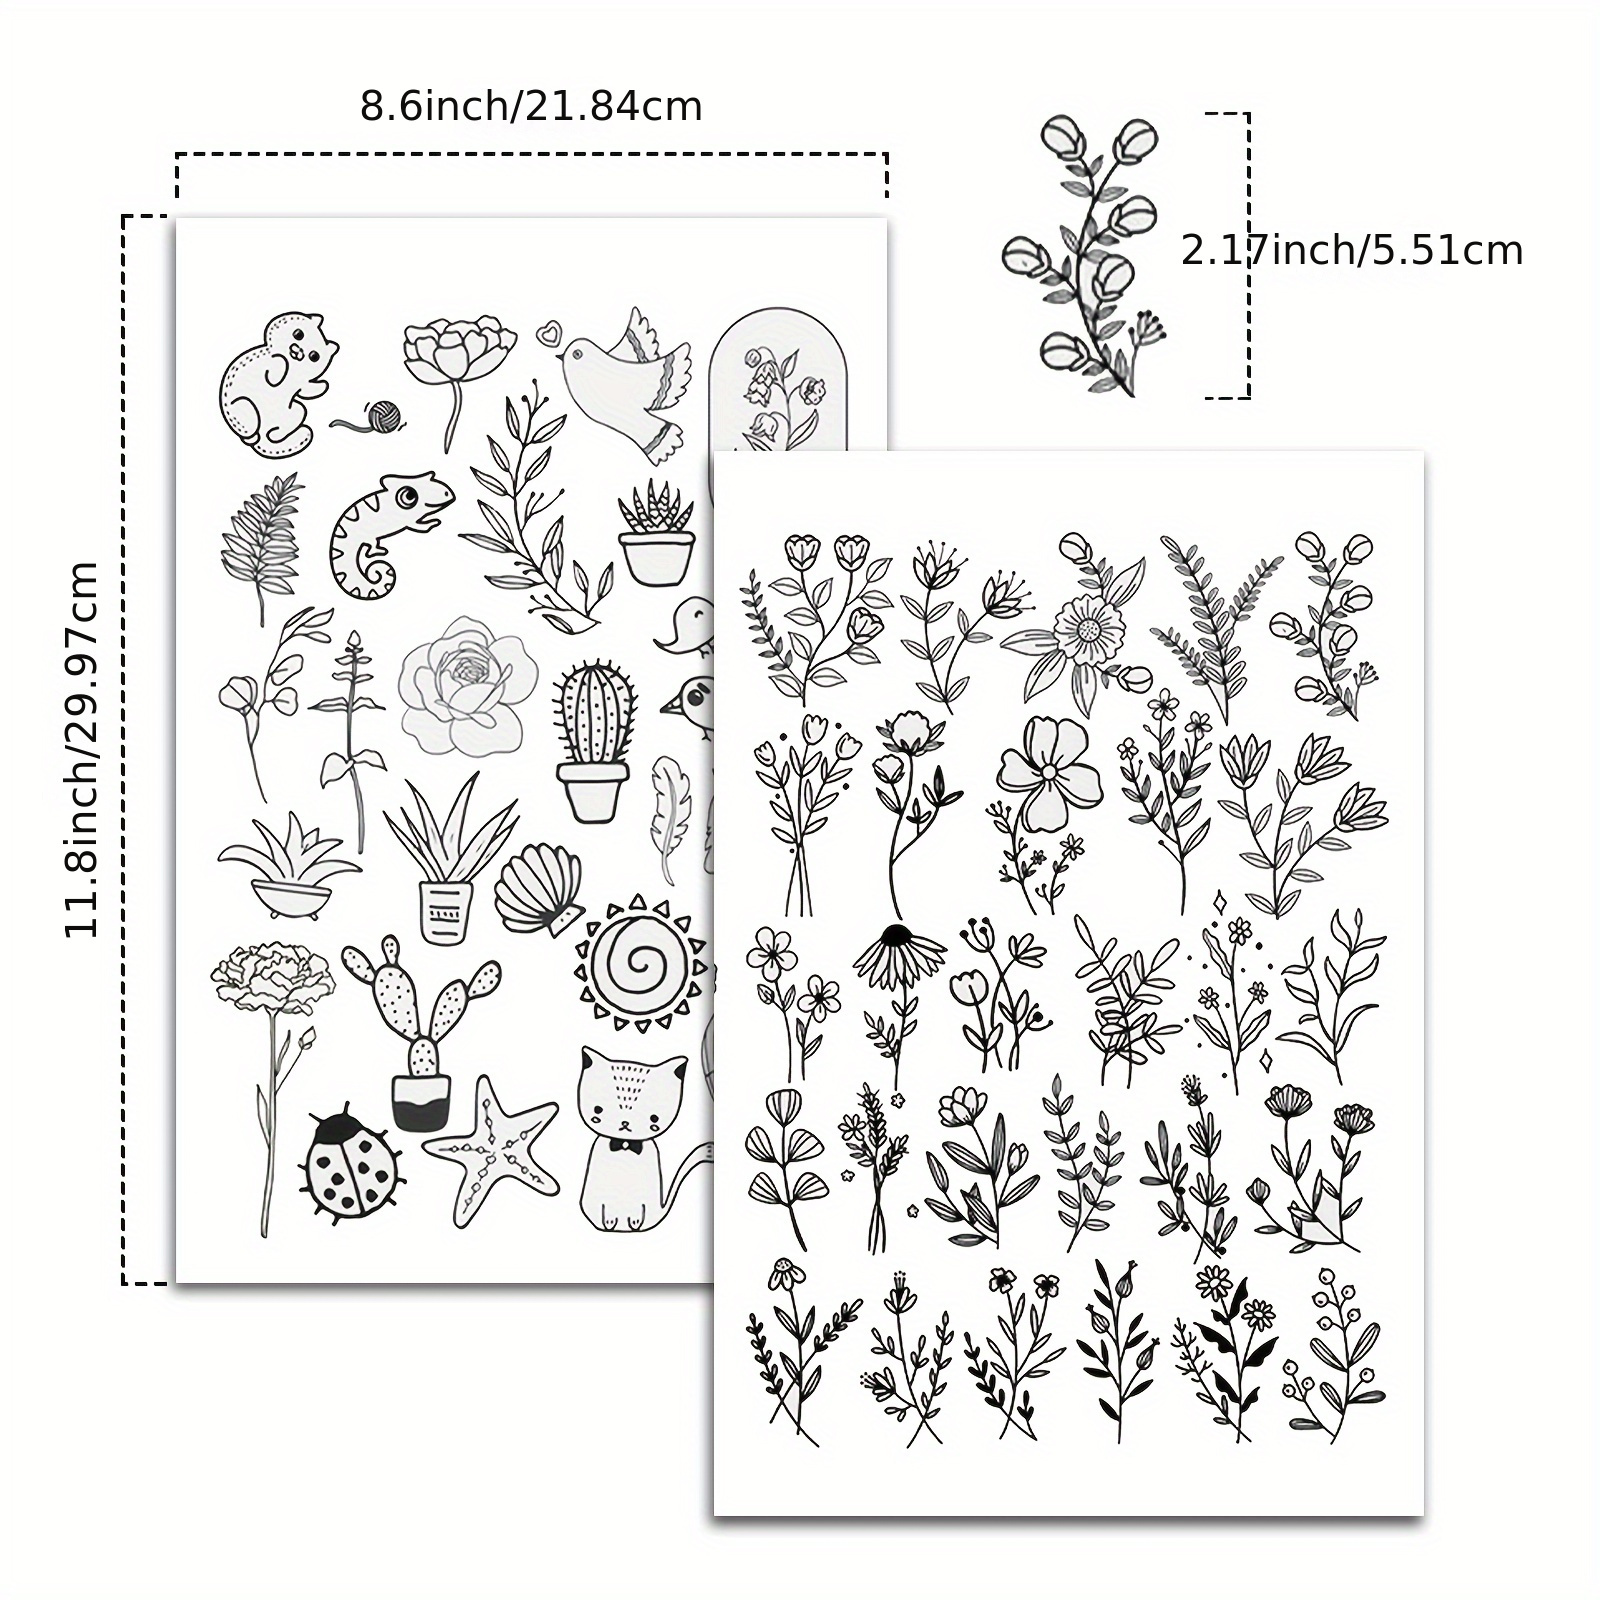  Water Soluble Embroidery Patterns 50pcs Embroidery Stick and  Stitch Patterns Transfers Water Soluble Stabilizer for Embroidery Stick and  Stitch Embroidery Designs, Embroidery Transfer Paper Tear Stick